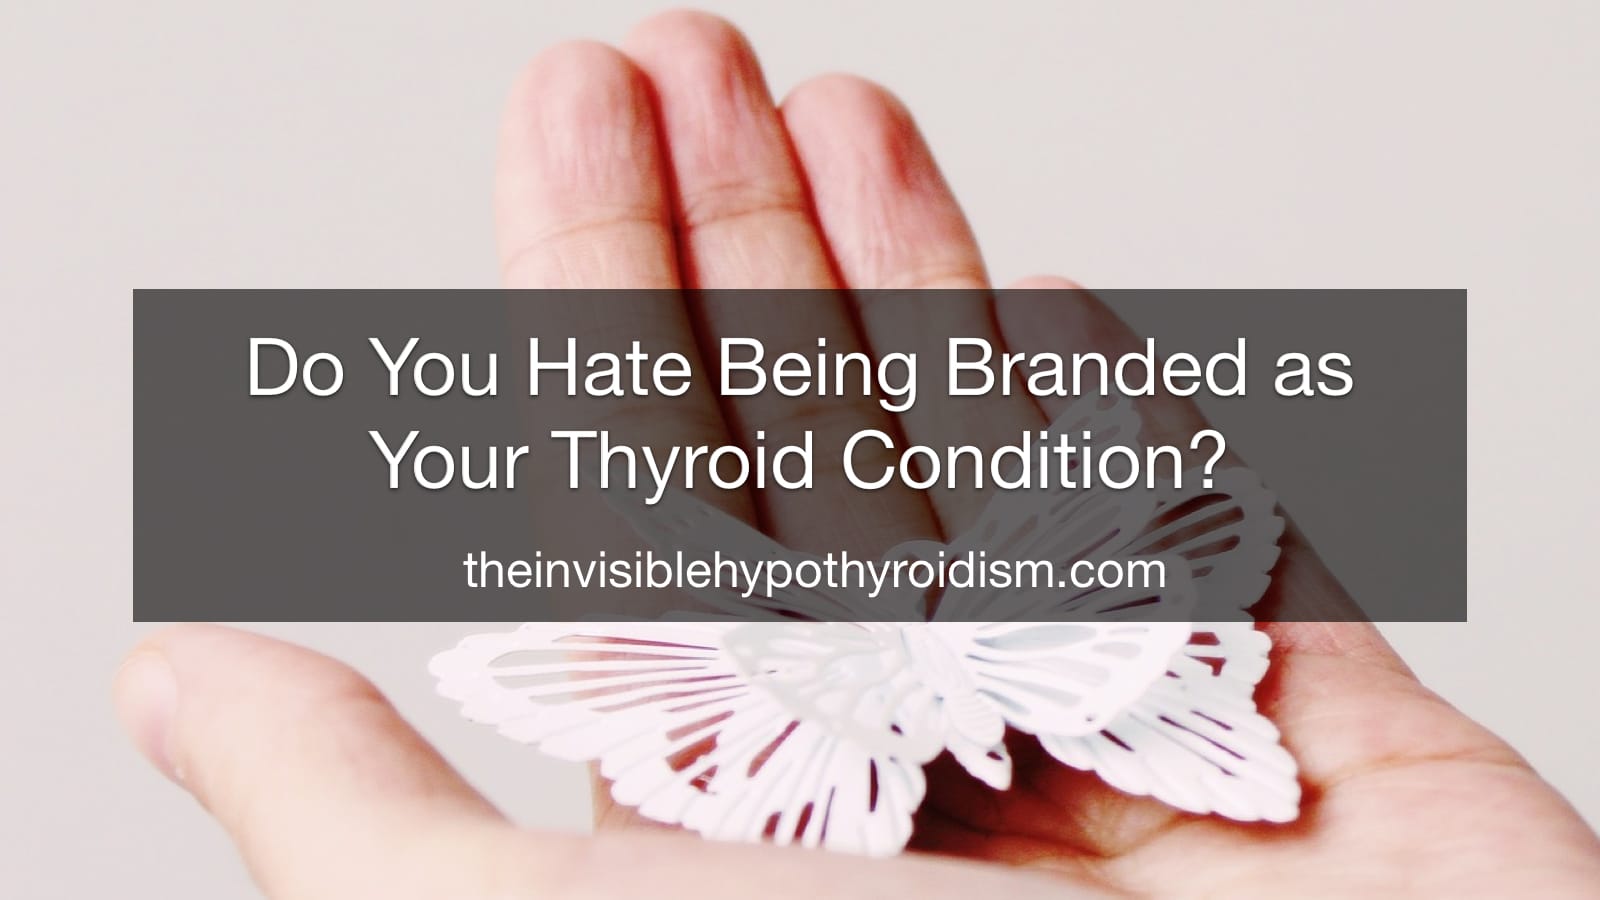 Do You Hate Being Branded as Your Thyroid Condition?